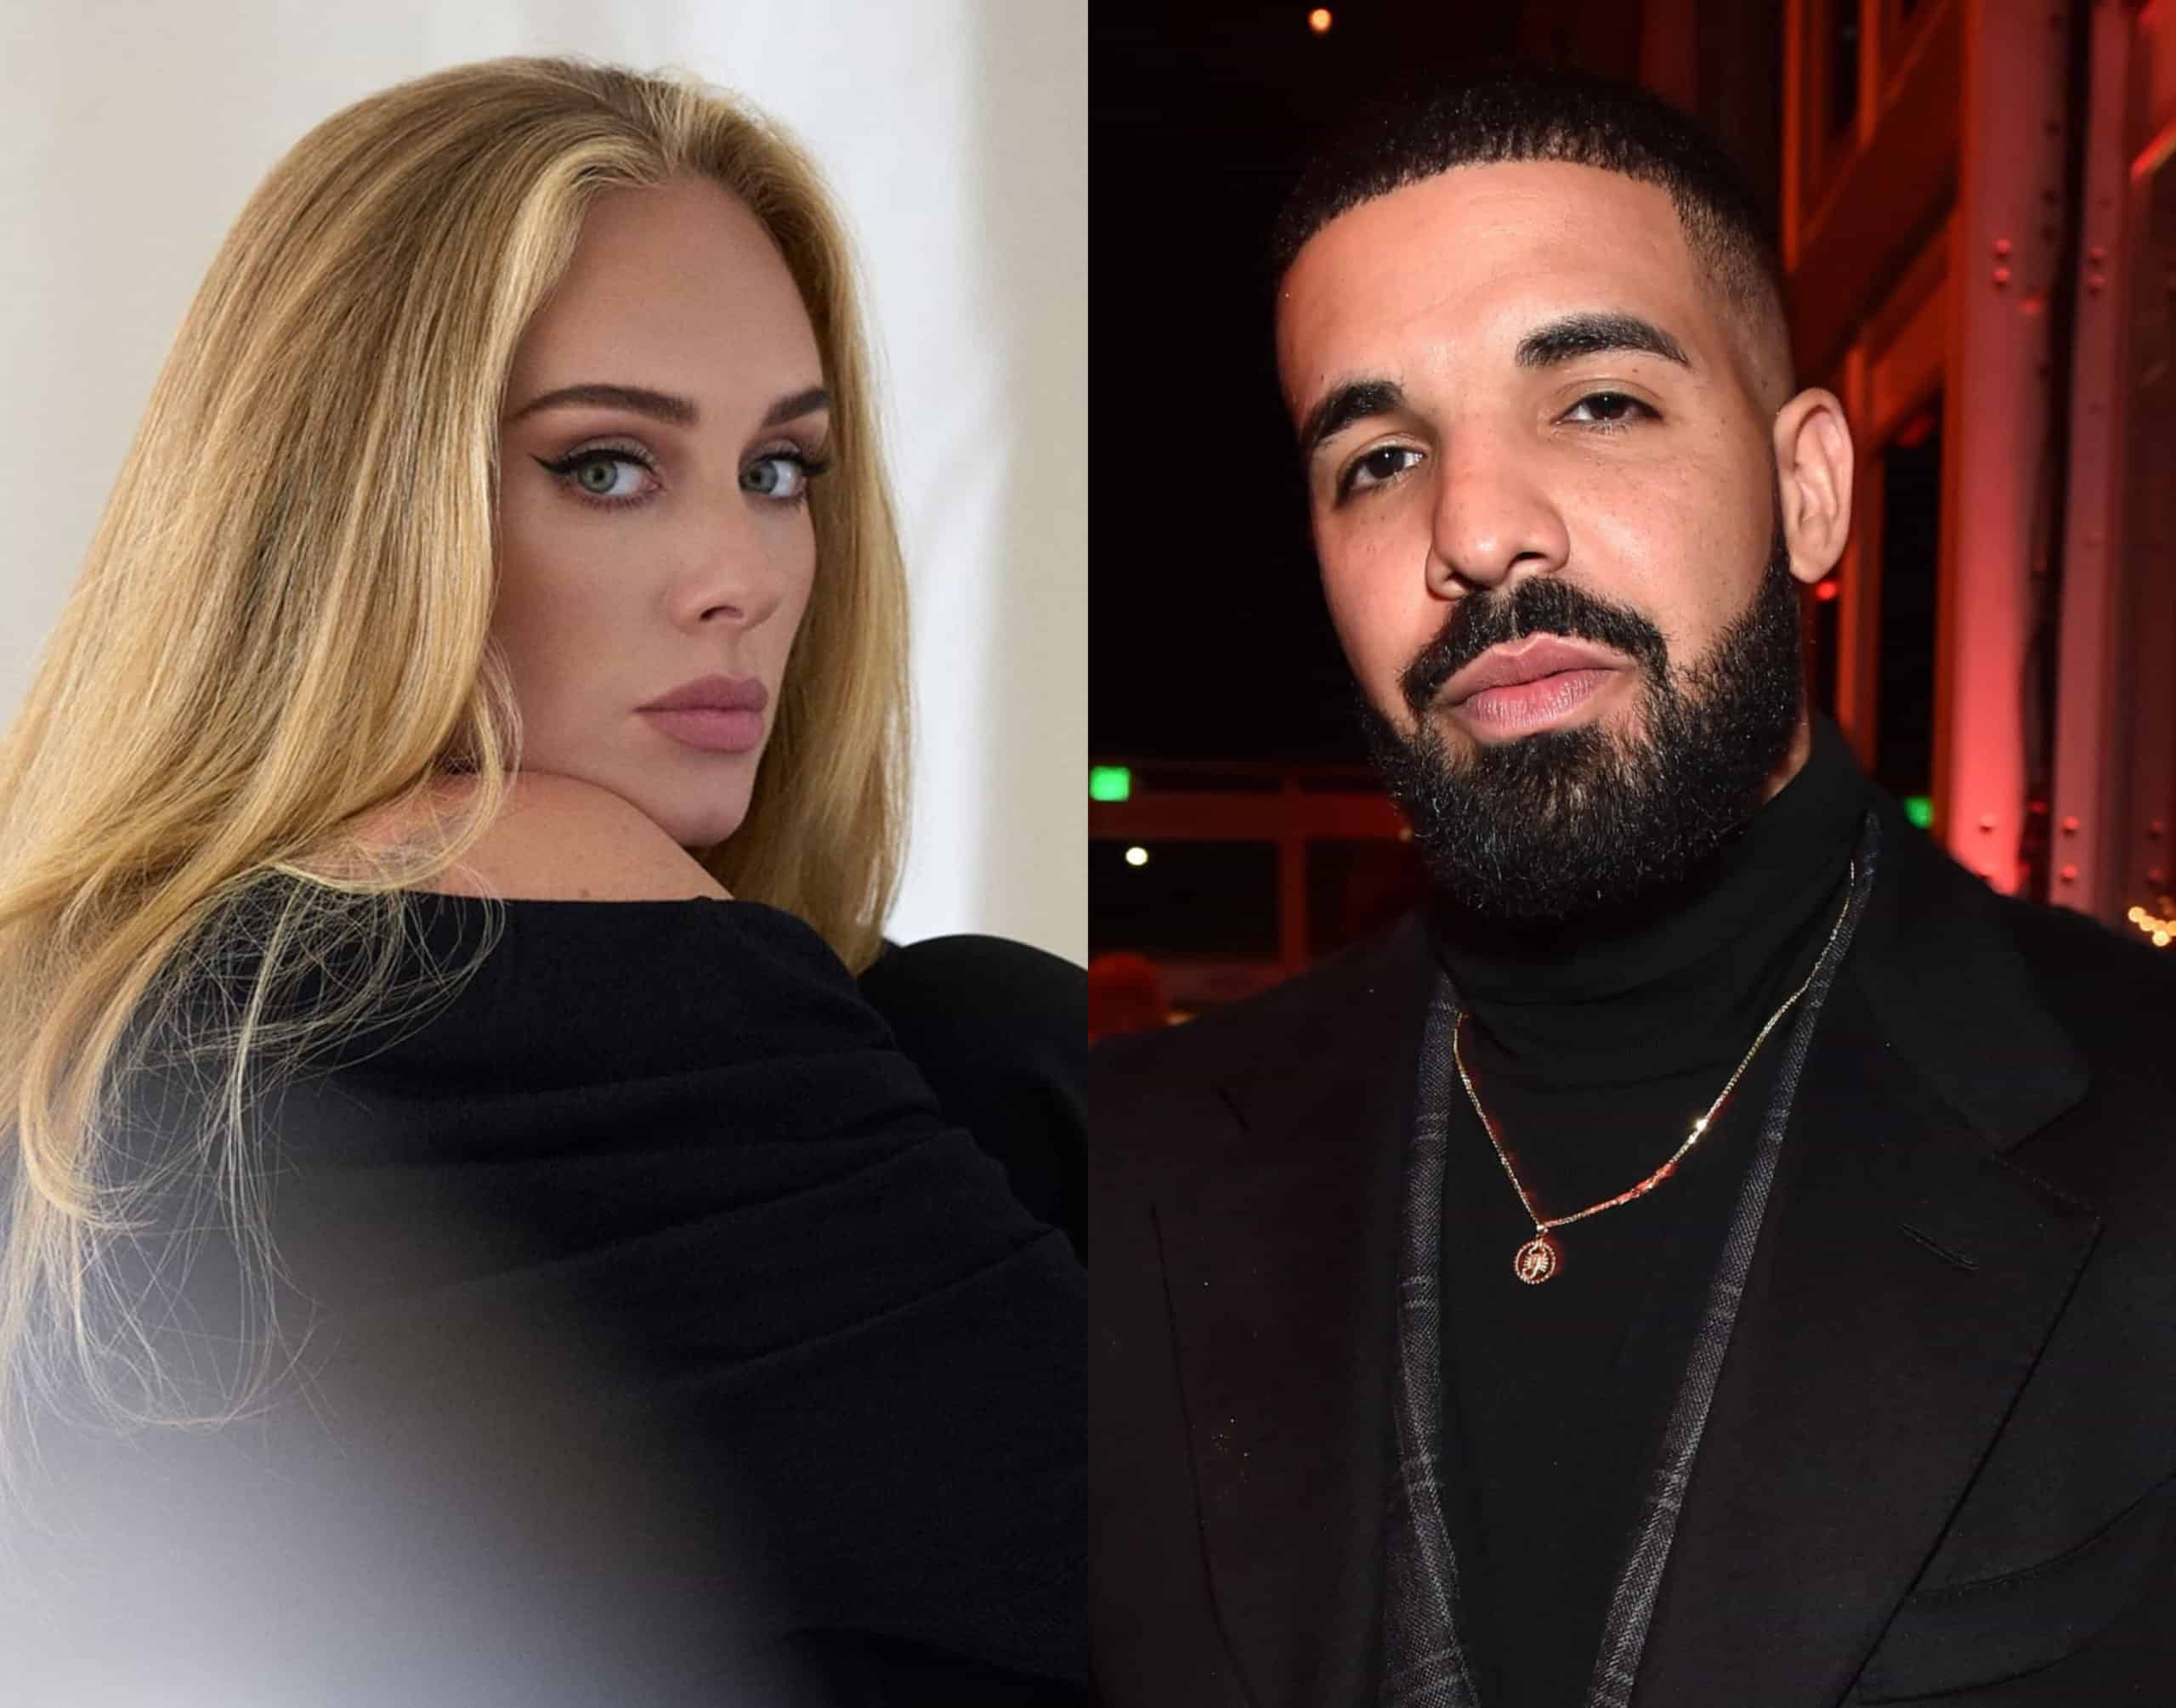 Adele Reveals She Played Her Upcoming New Album To Drake Last Year